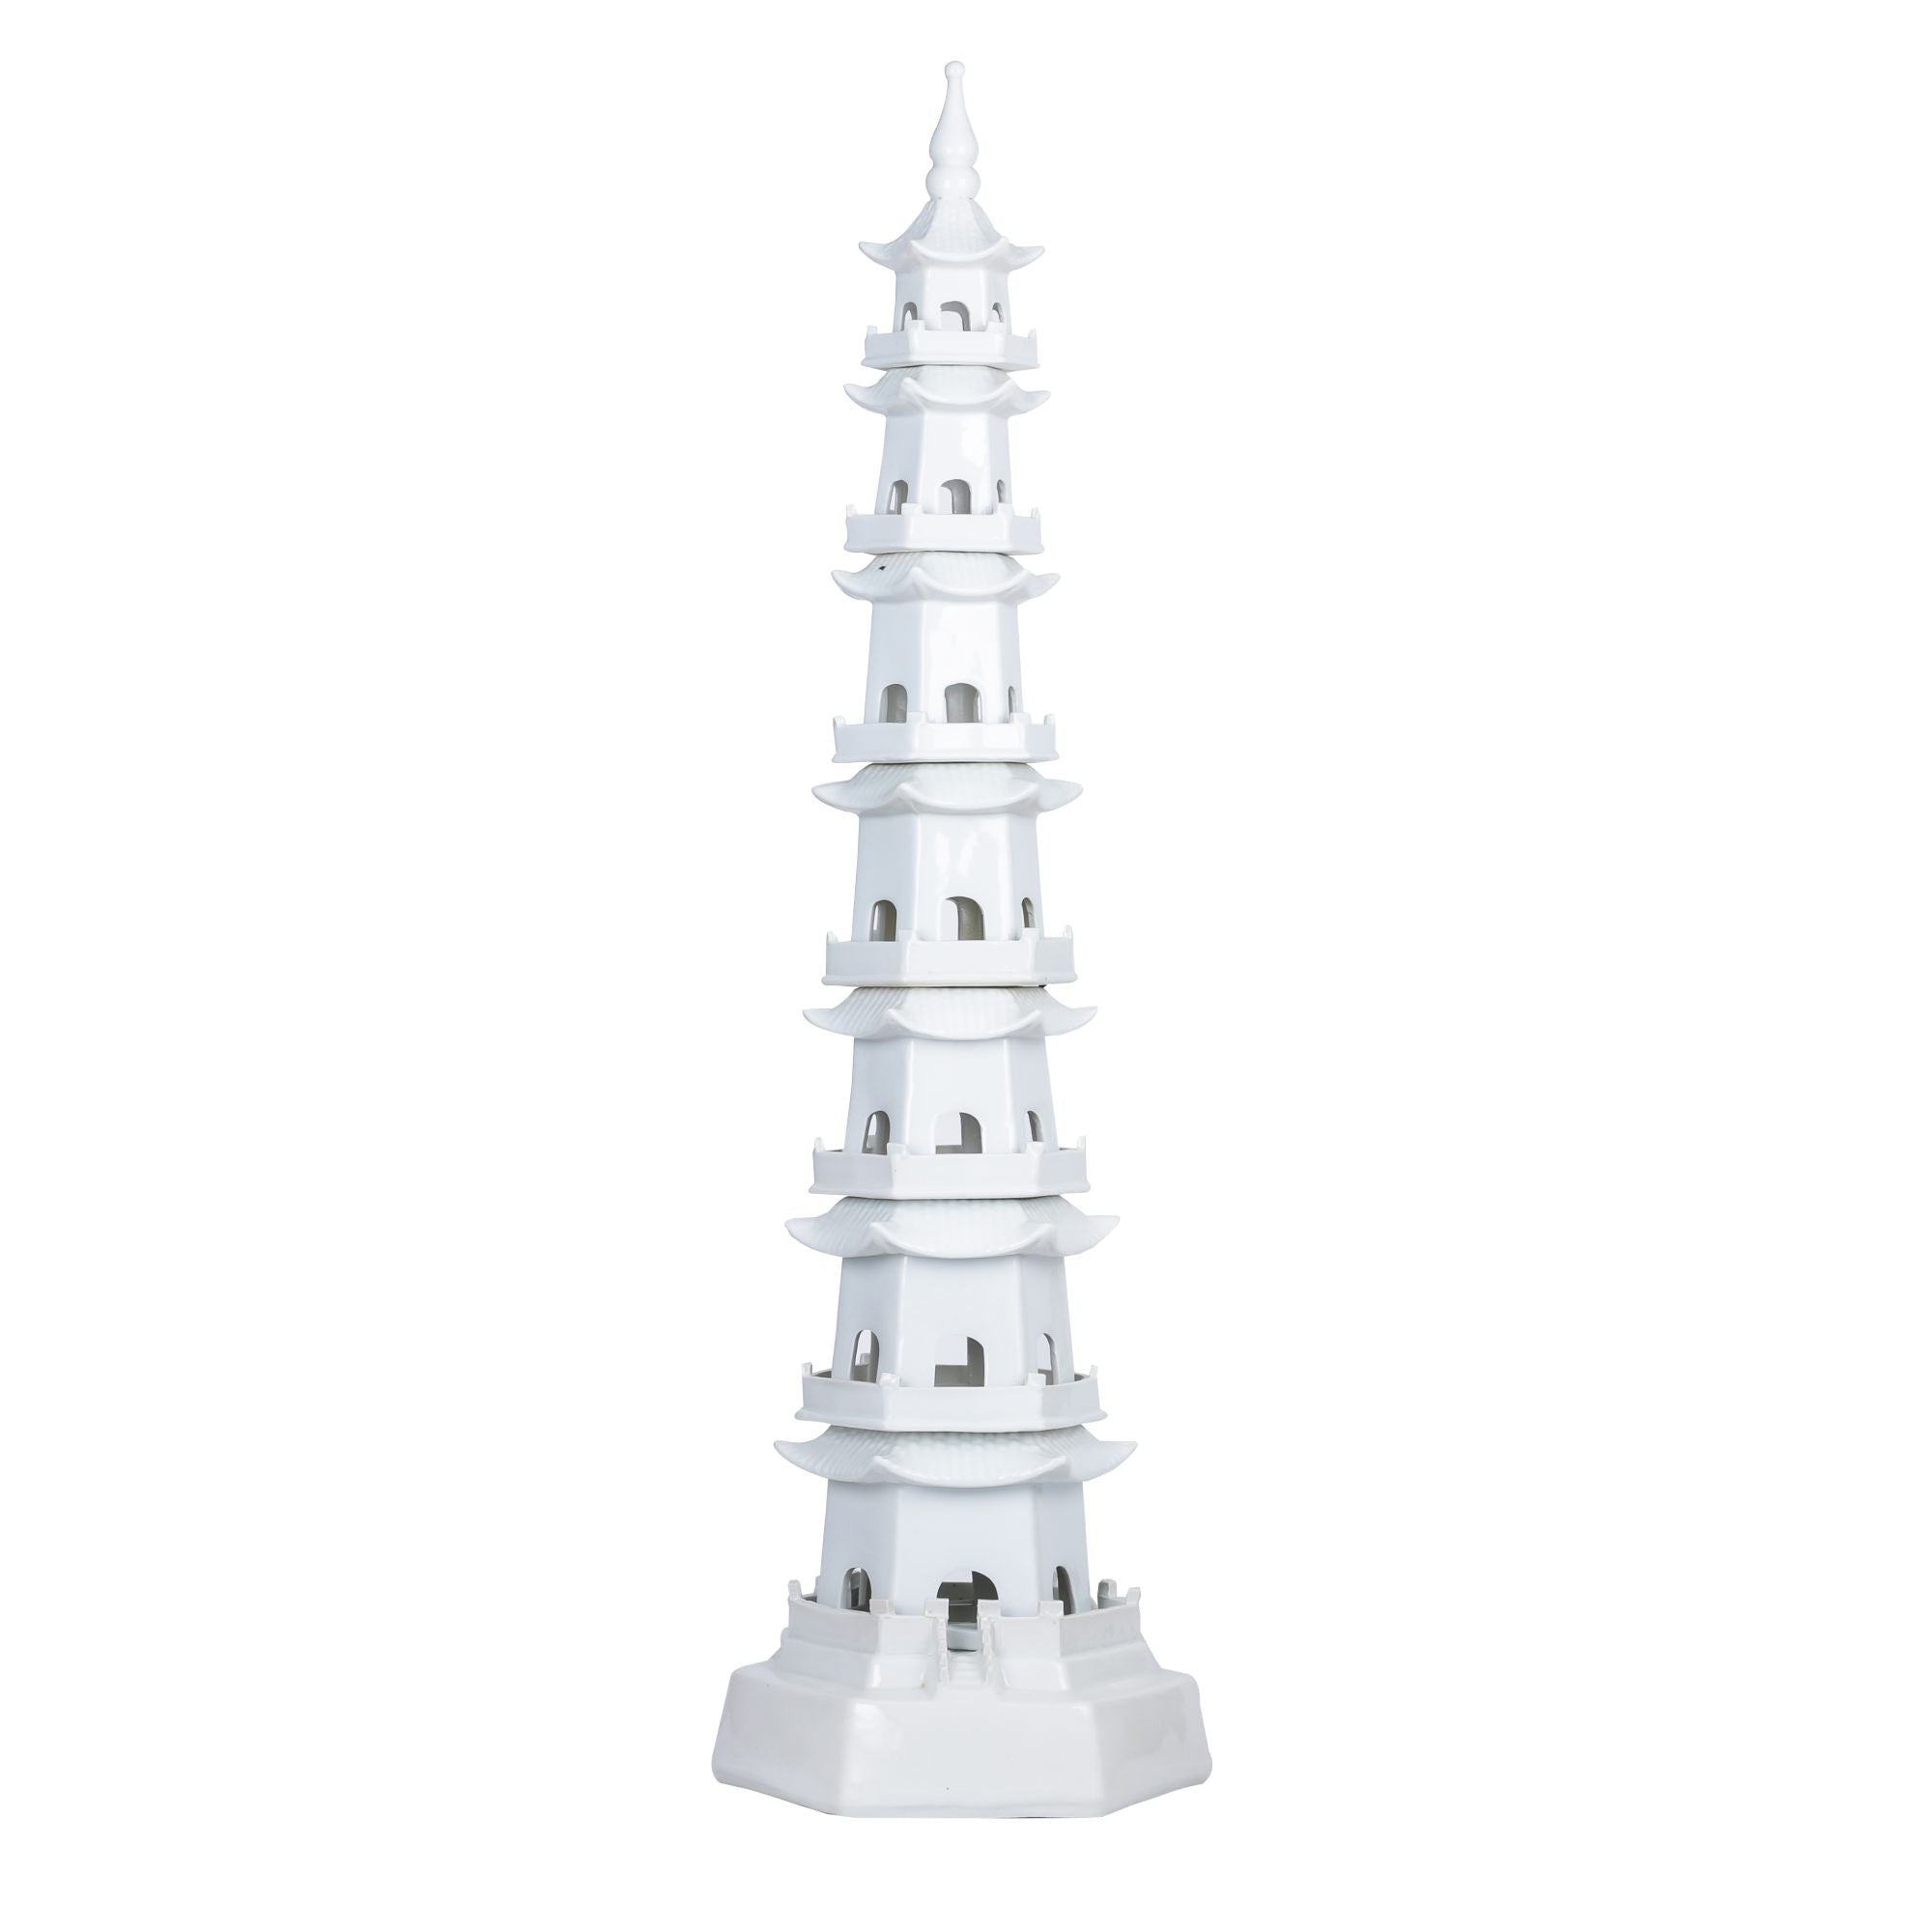 Legend of Asia Giftware Legend of Asia White Pagoda 7 Tier